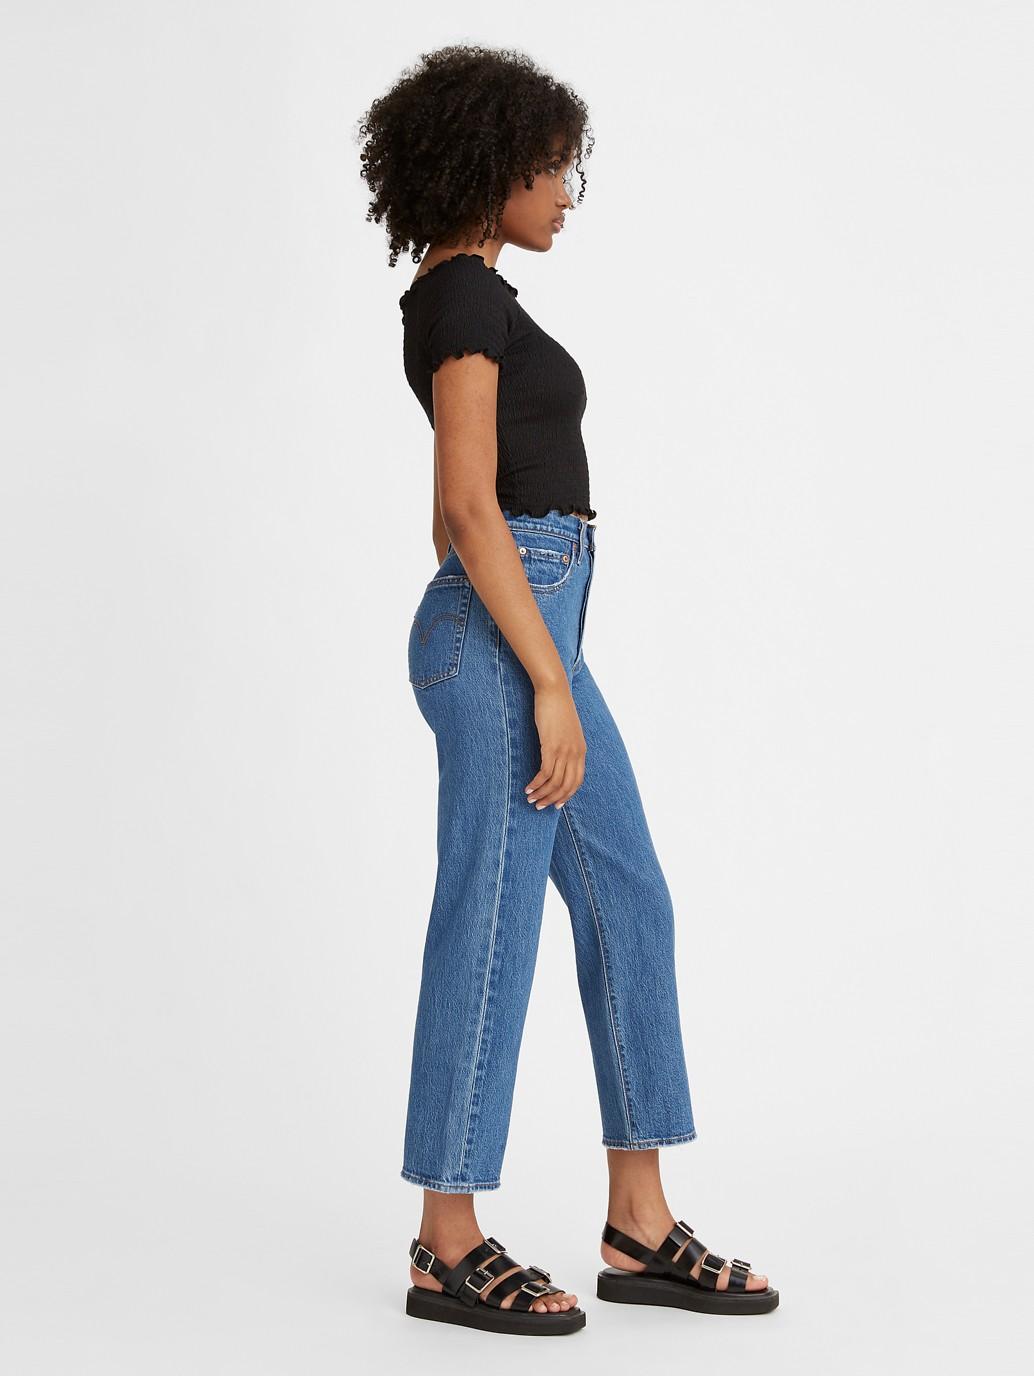 Buy Levi's® Women's Ribcage Straight Ankle Jeans | Levi's 